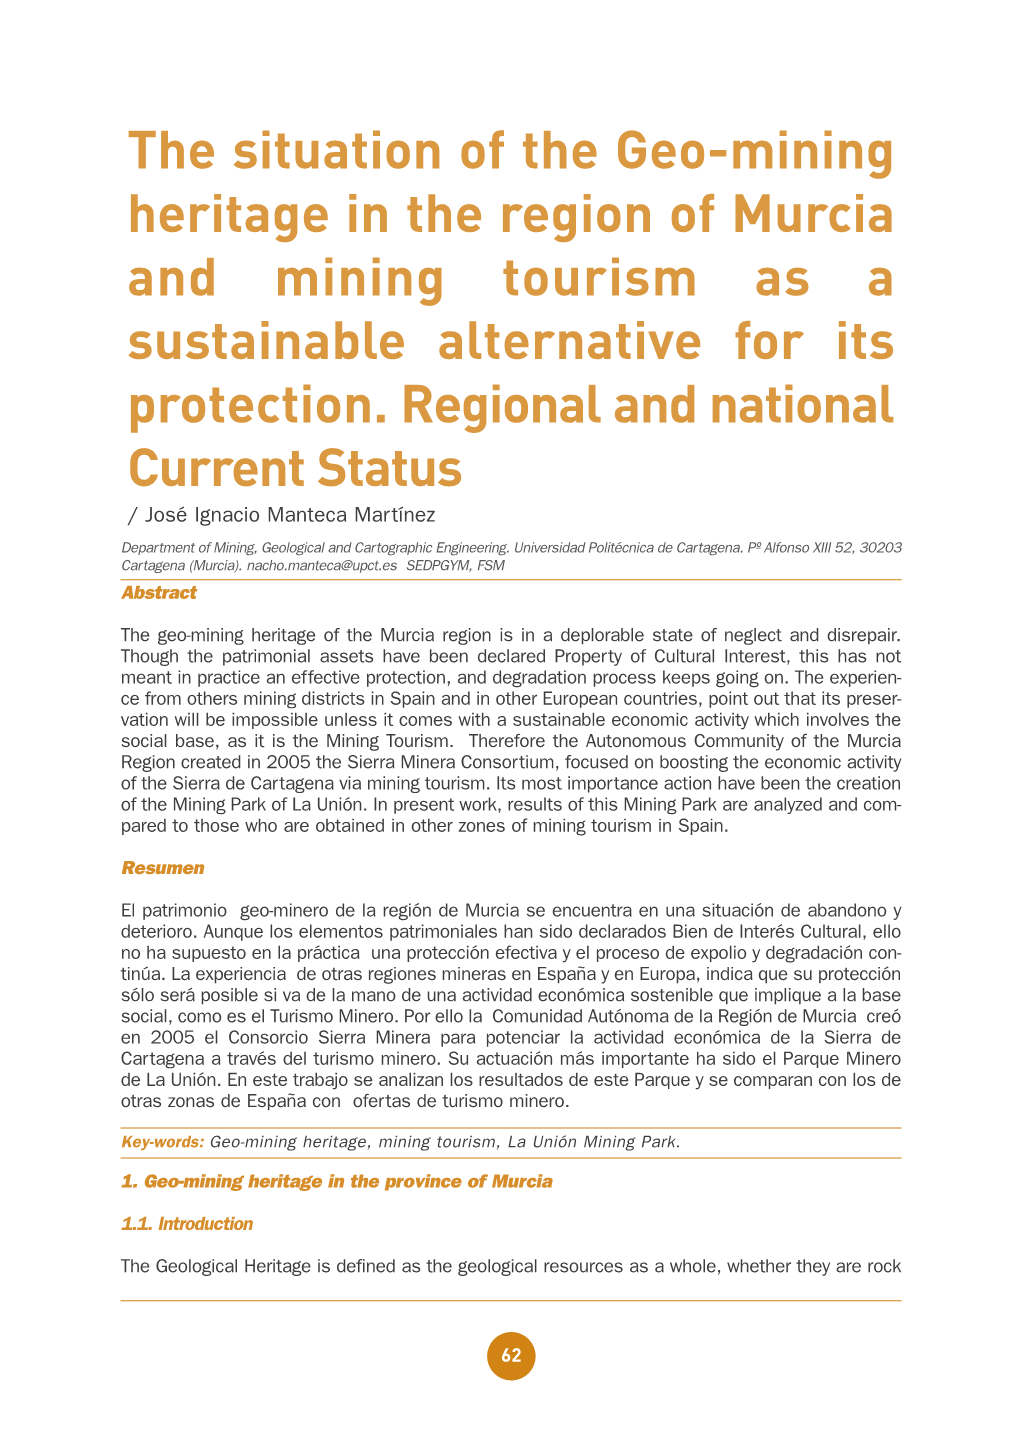 The Situation of the Geo-Mining Heritage in the Region of Murcia and Mining Tourism As a Sustainable Alternative for Its Protection